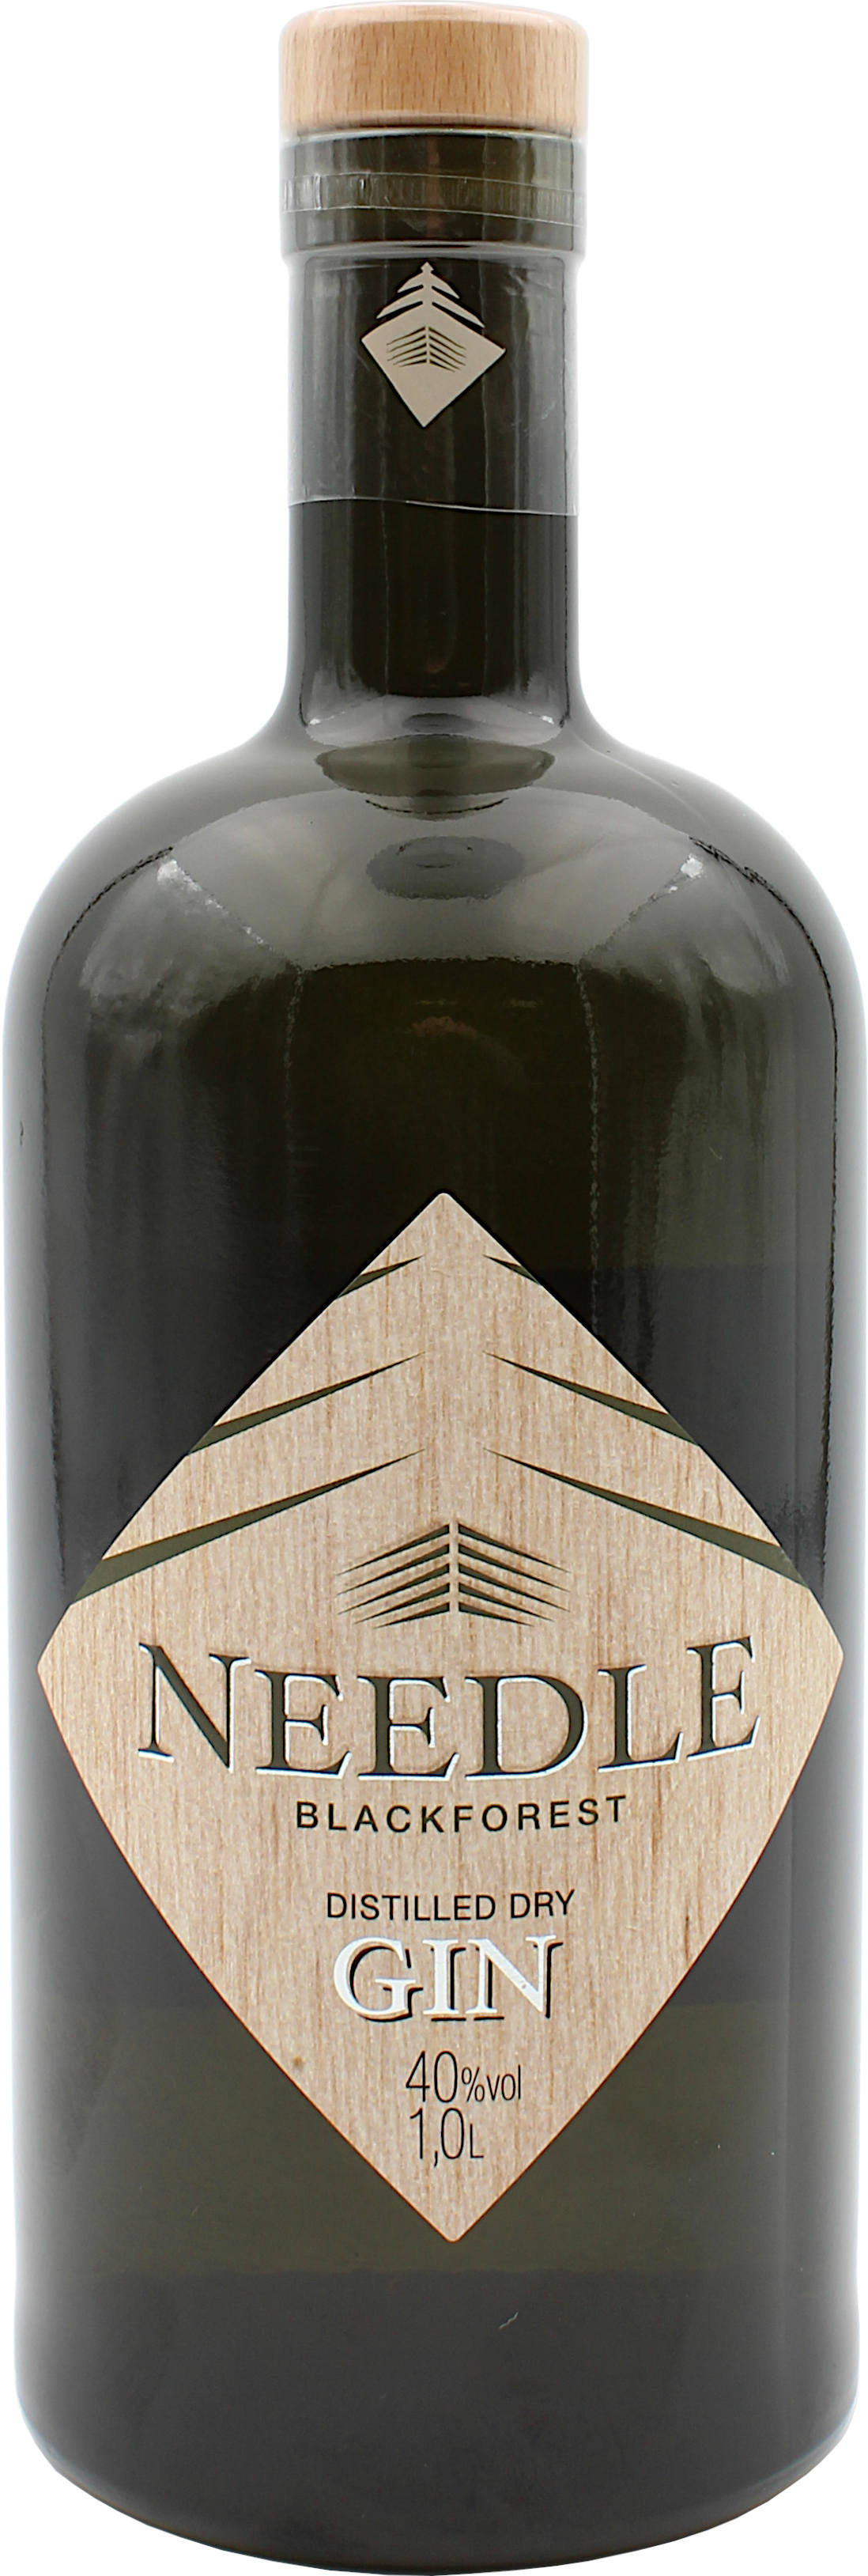 Needle Black Forest Dry Gin 40.0% 1 Liter